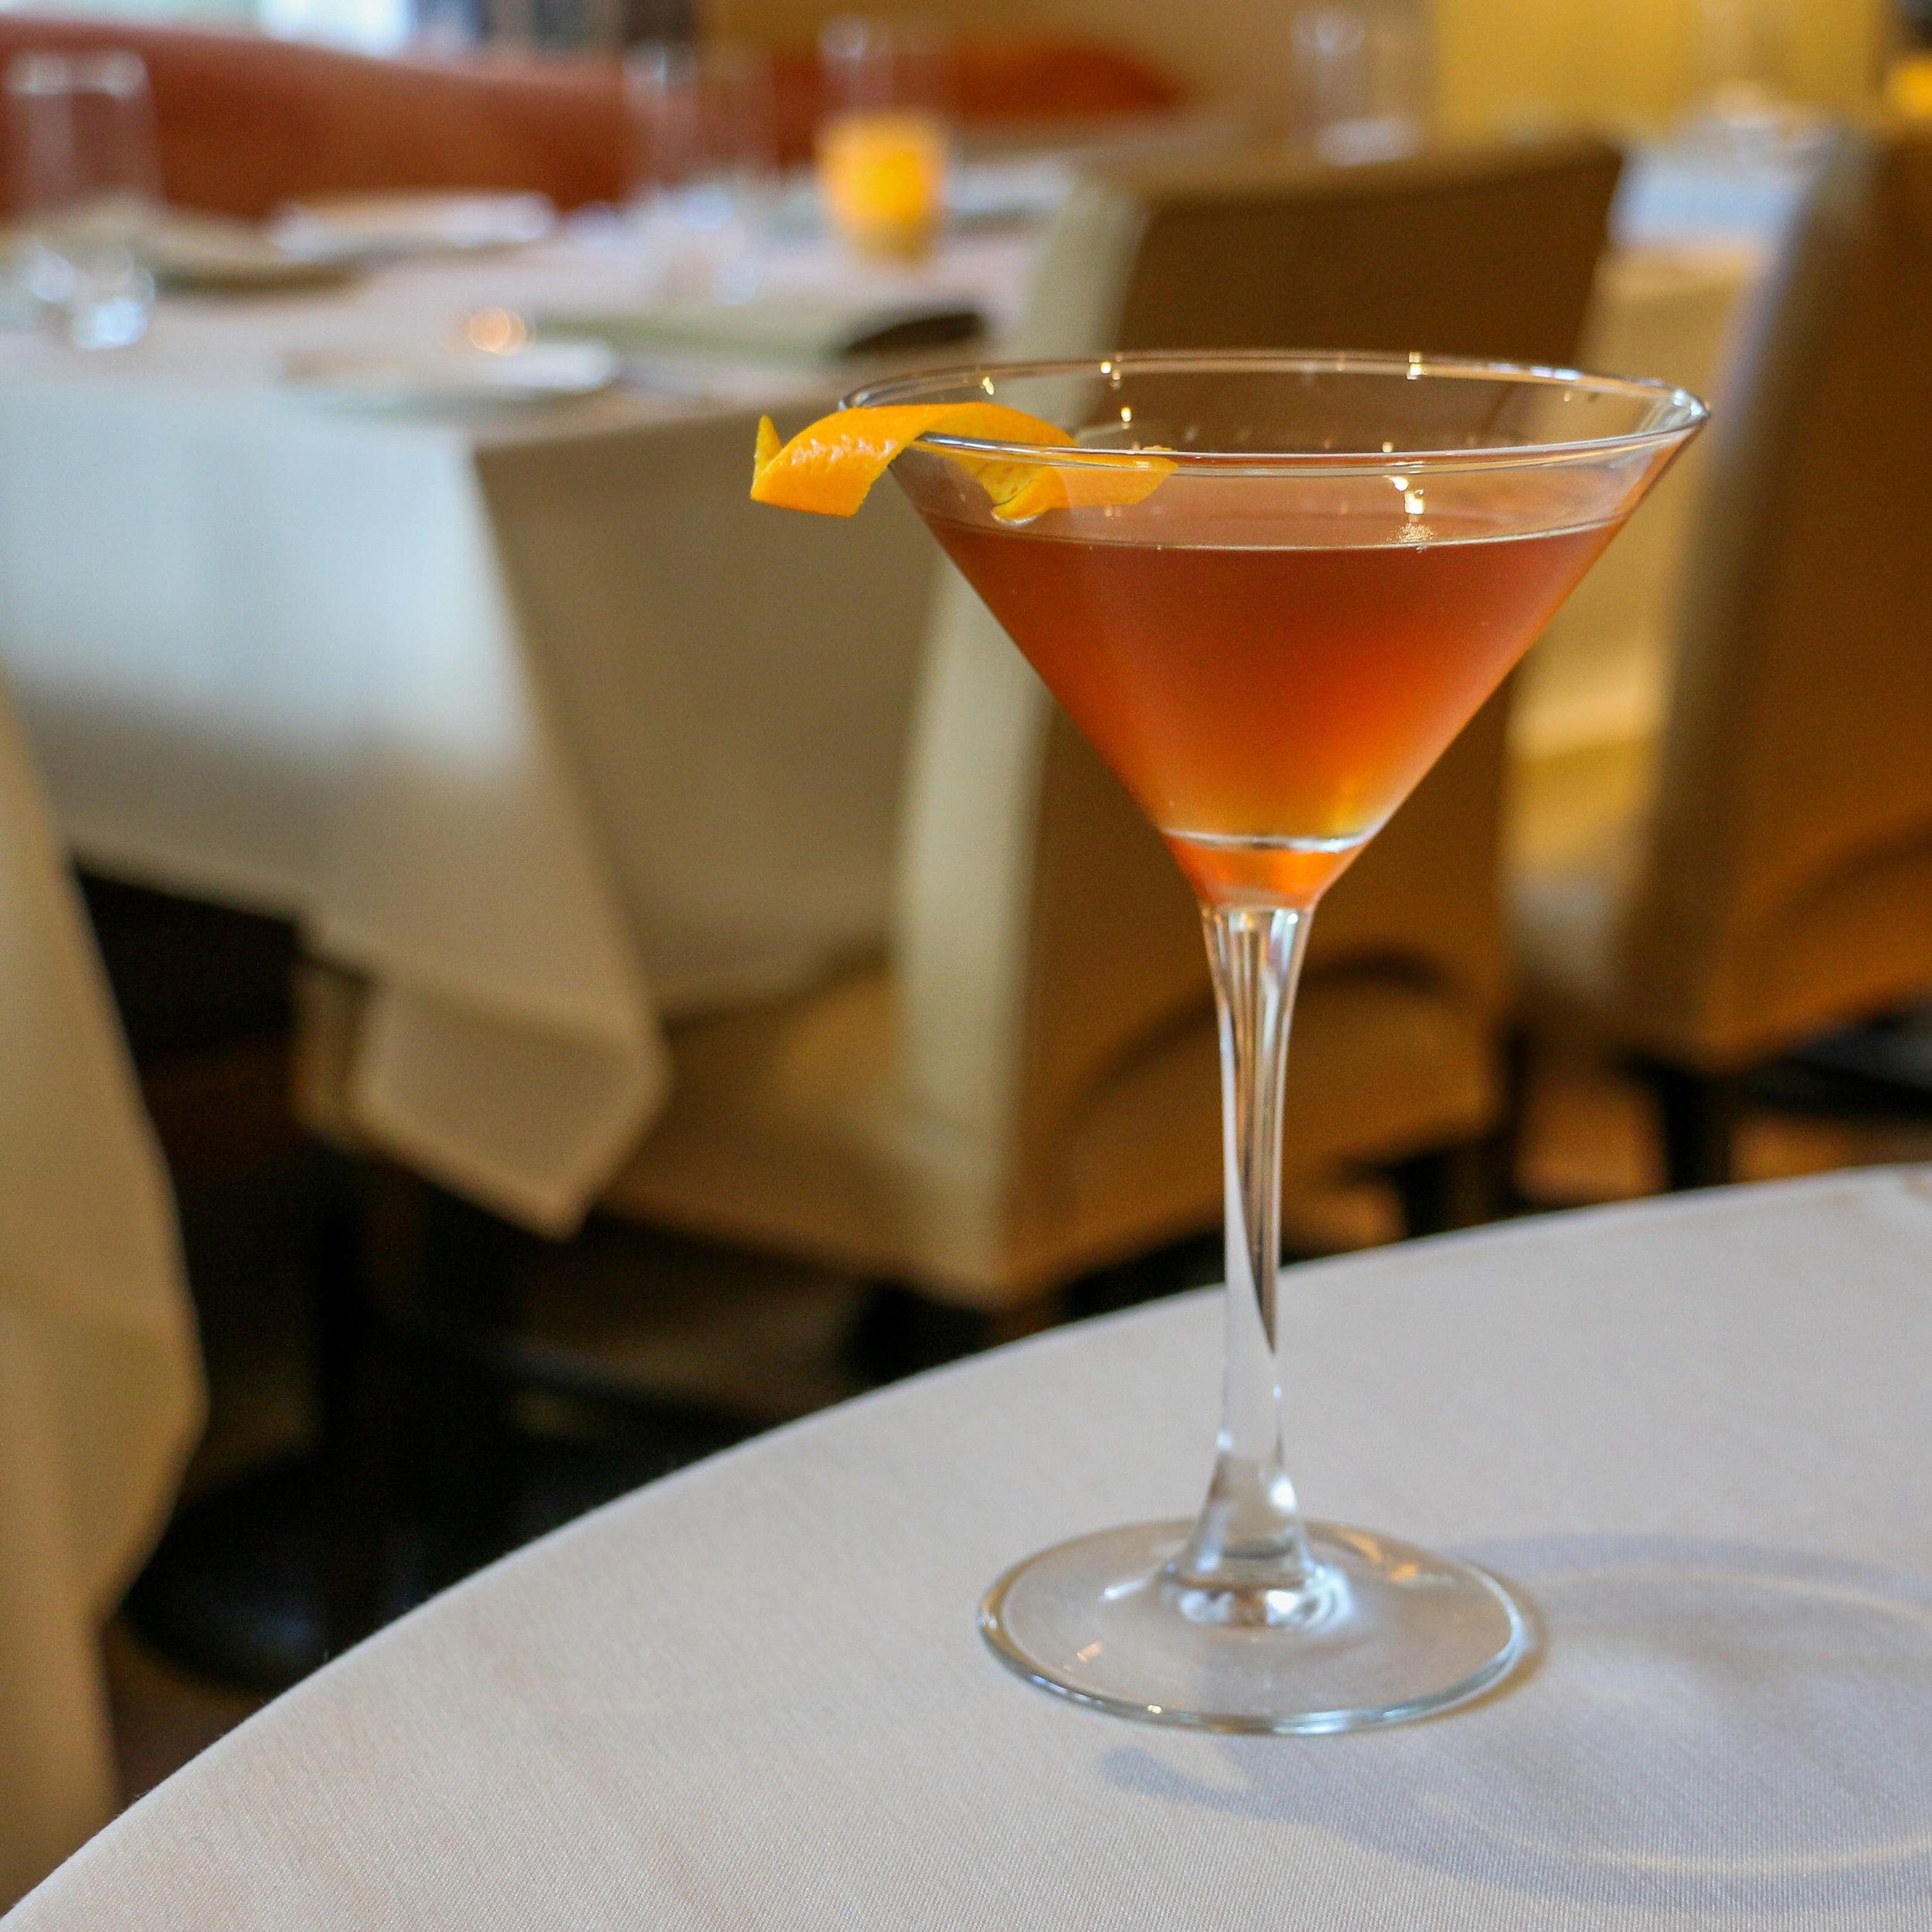 A reason to be excited! Cheers to the weekend ✨

Raisin d&rsquo;&Ecirc;tre: raisin infused 10 year rum, rye, fino sherry, carpano antica

#boston #bostonfood #bostonfoodies #bostoneats #bostonrestaurants #bostonlunch #frenchfood #bostonpublicgarden #